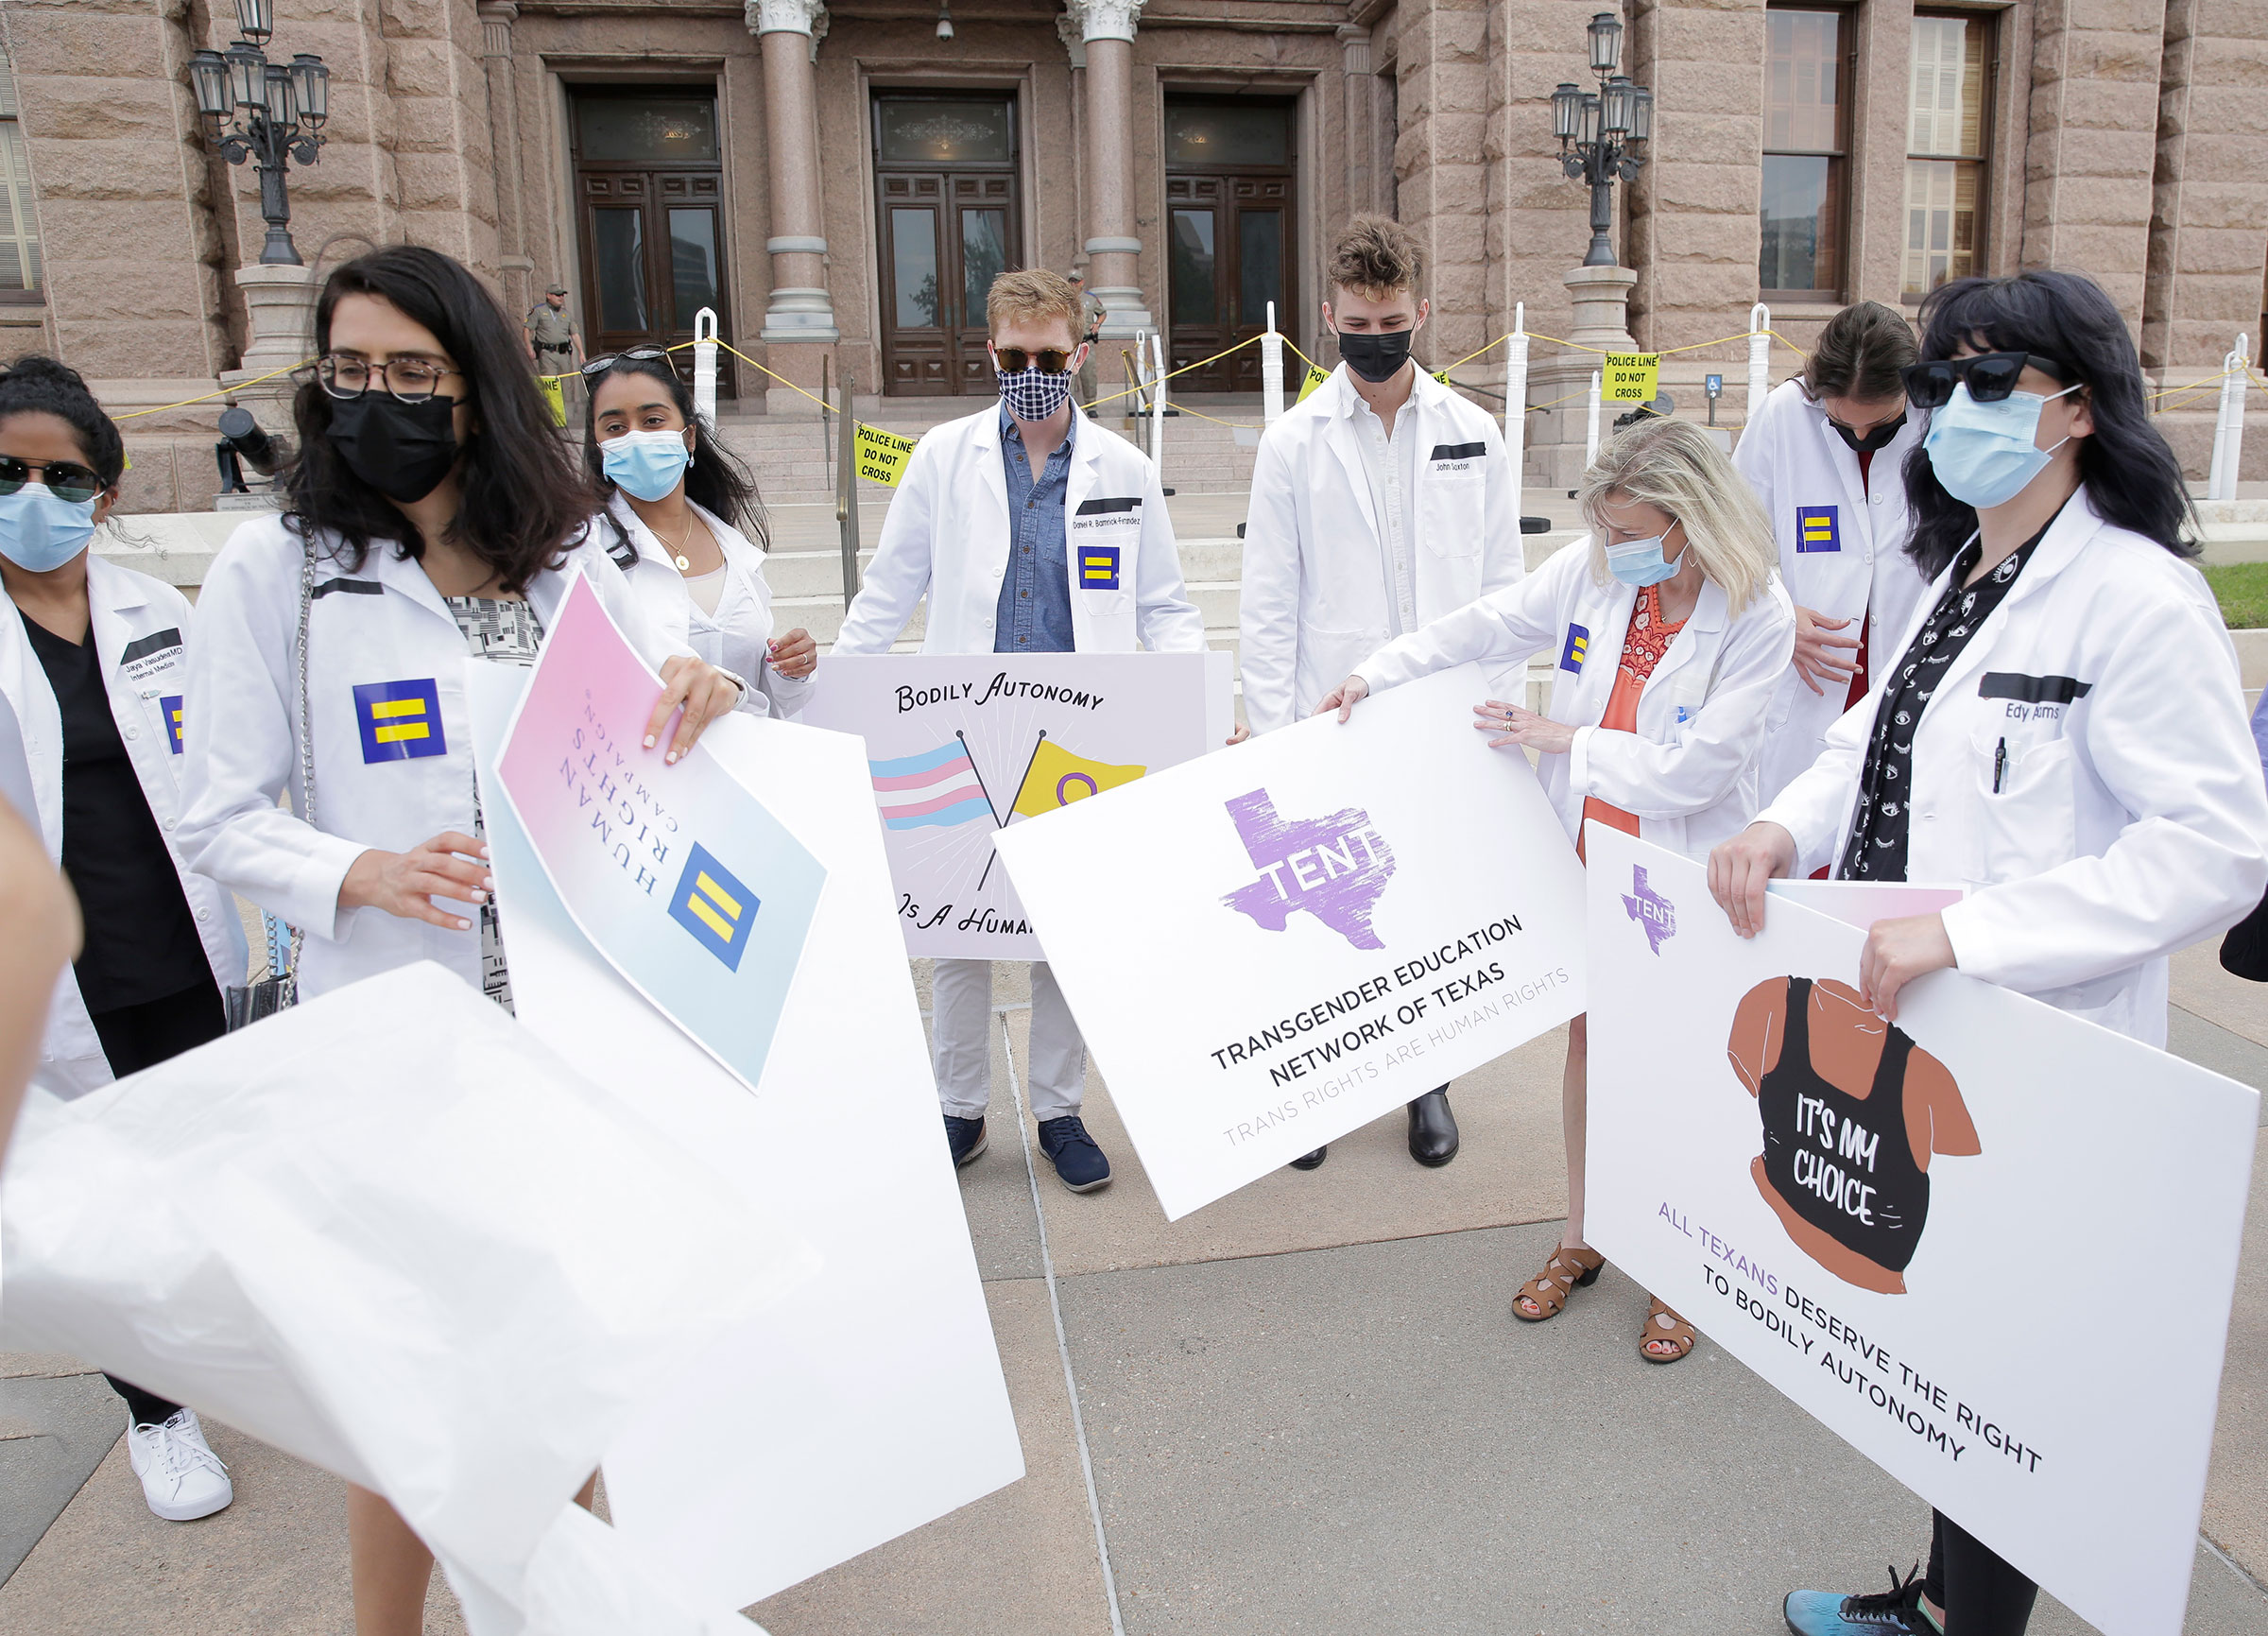 Medical professionals speak out against legislation that would ban the gender-affirming medical care recommended by every major medical association, at a rally at the Texas State Capitol in Austin on May 4, 2021. (Erich Schlegel—Human Rights Campaign/AP)